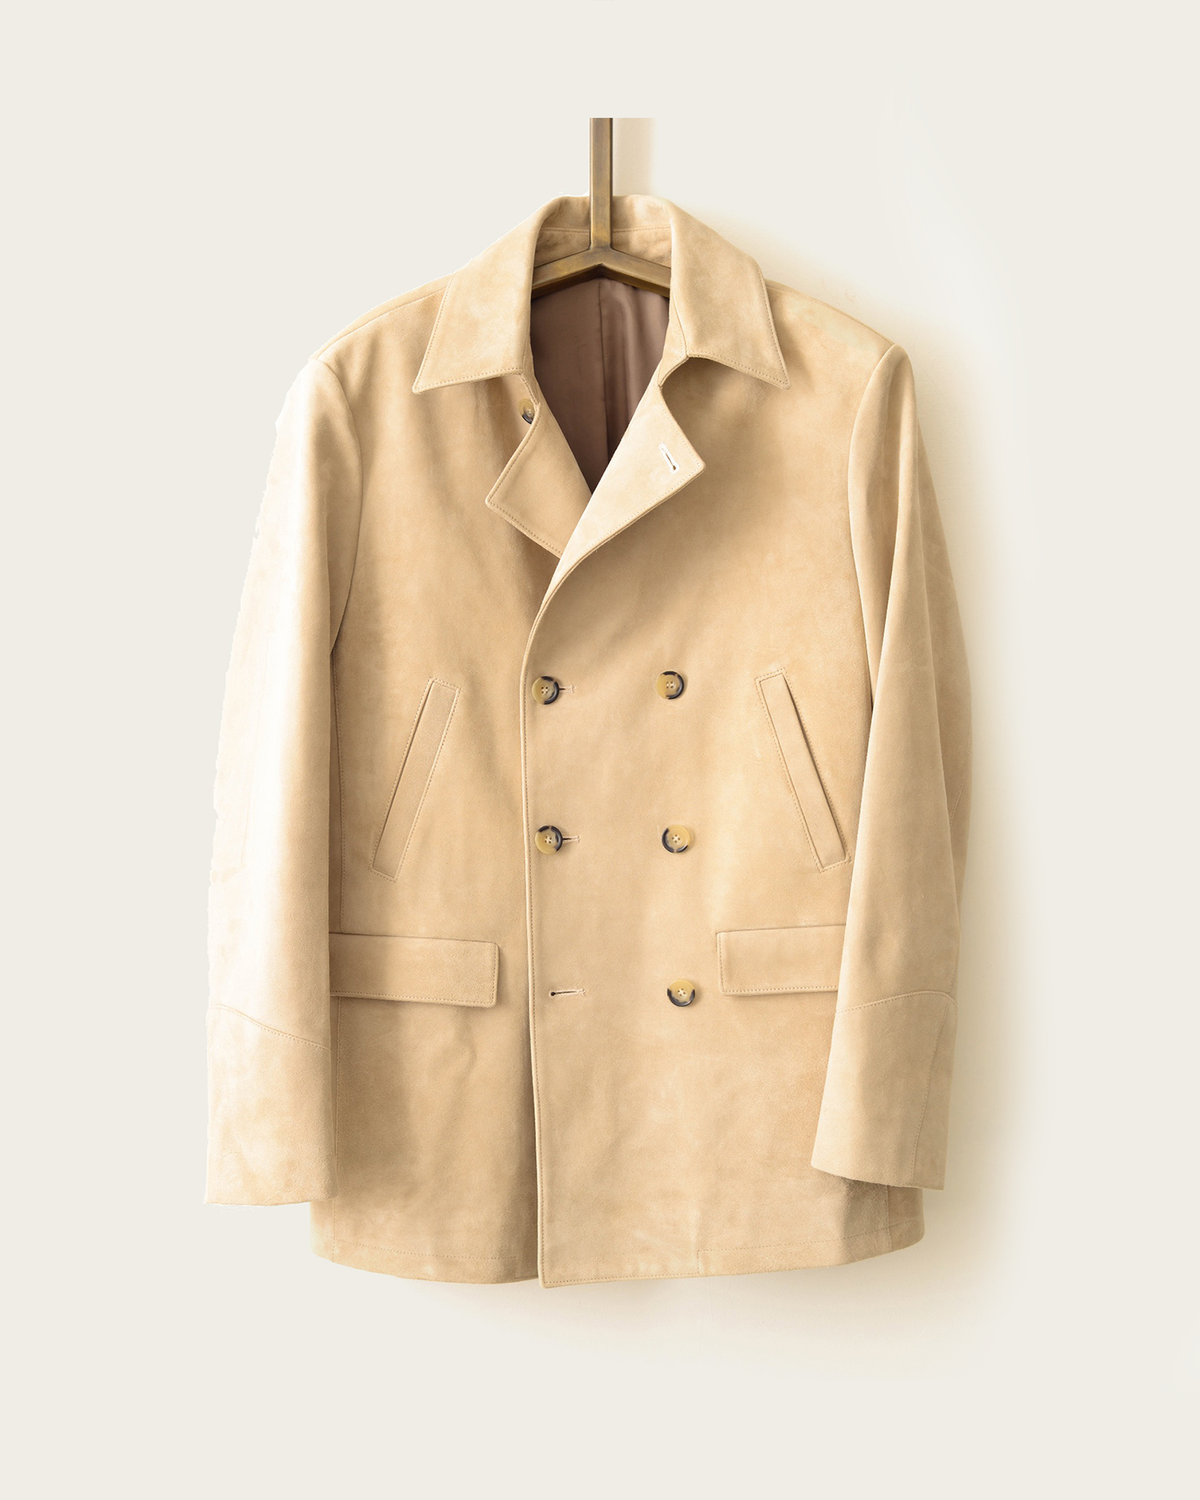 Image of the Peacoat from Savas